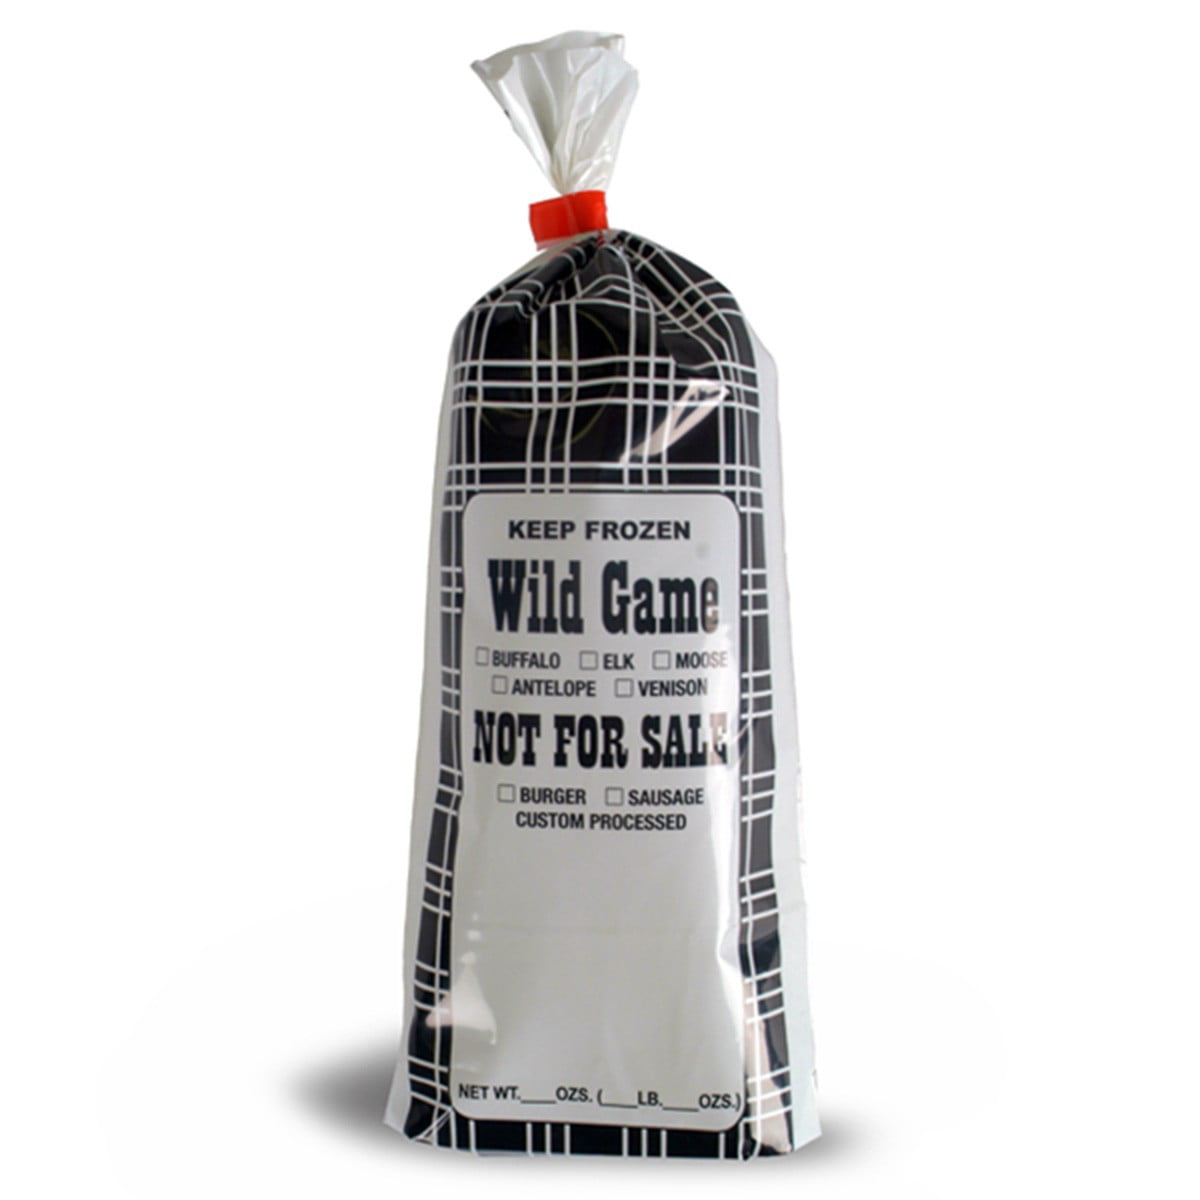 140 Pack Wild Game Meat Bags for Freezer, 1 Lb Ground Meat Bags, Wild Game Meat  Bags to Protect Your Meat from Freezer Burn - Yahoo Shopping